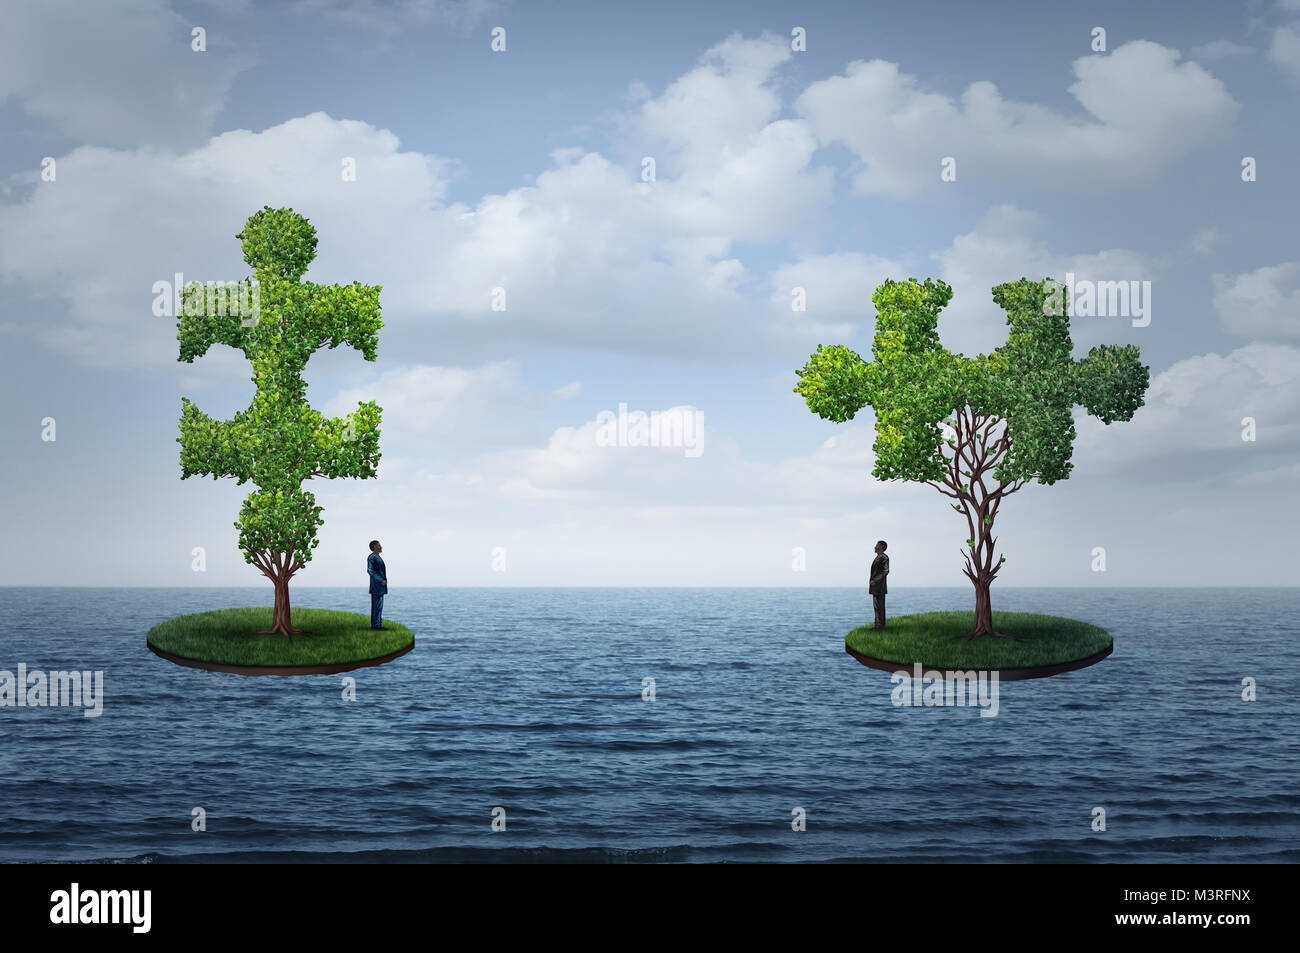 International trade challenge and global commerce puzzle as two people on seperate islands  with trees shaped as a jigsaw piesces. Stock Photo